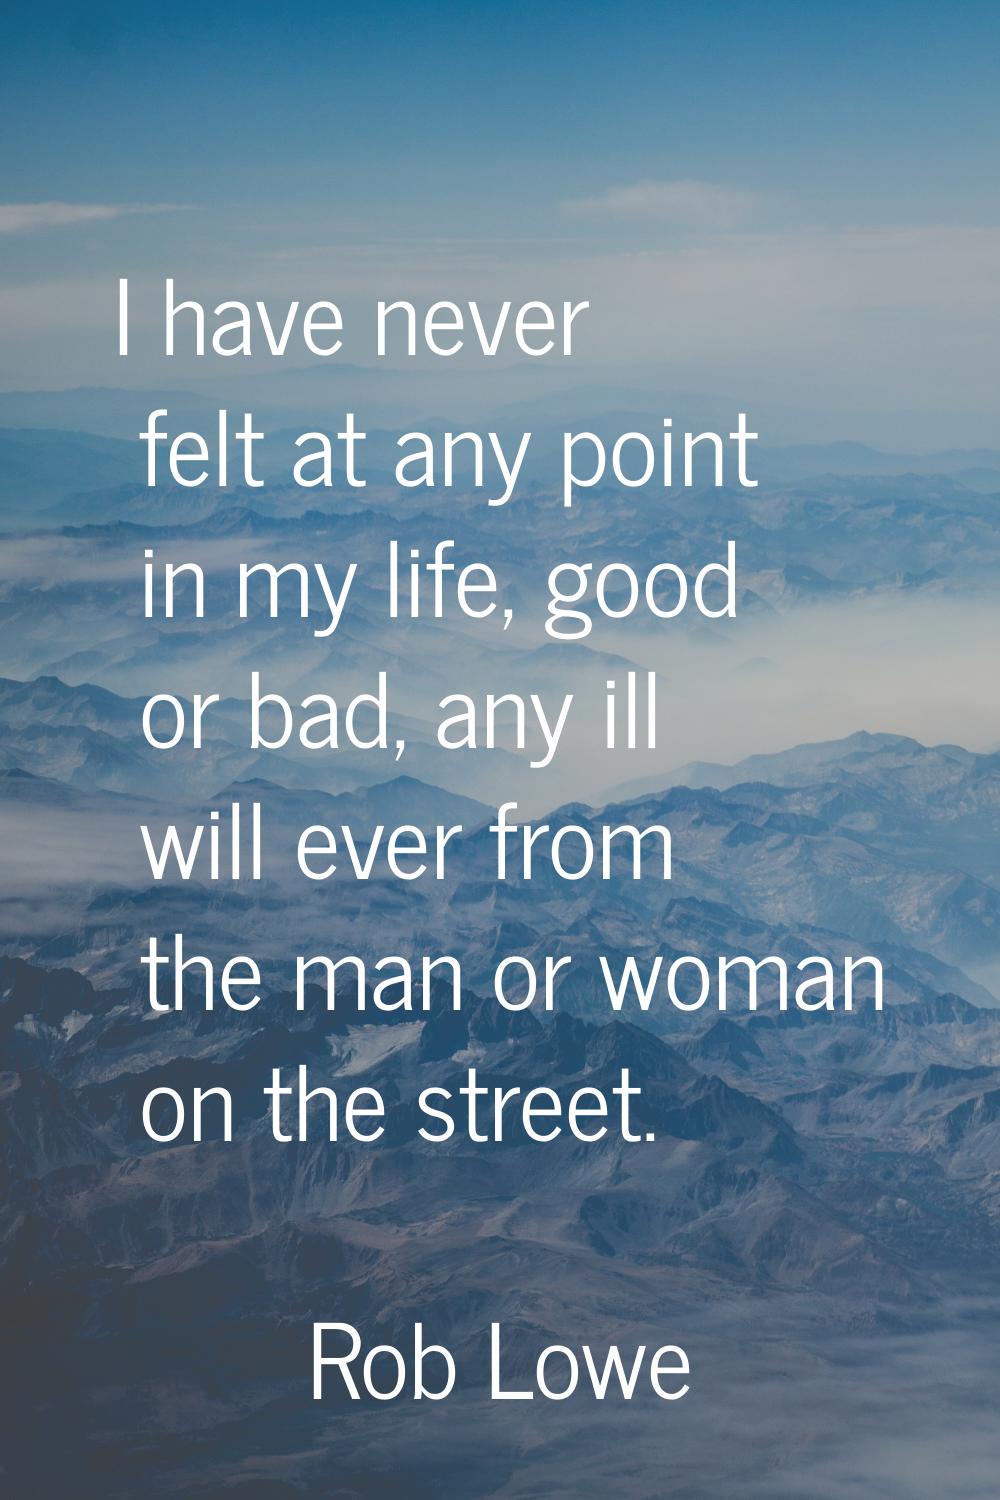 I have never felt at any point in my life, good or bad, any ill will ever from the man or woman on 